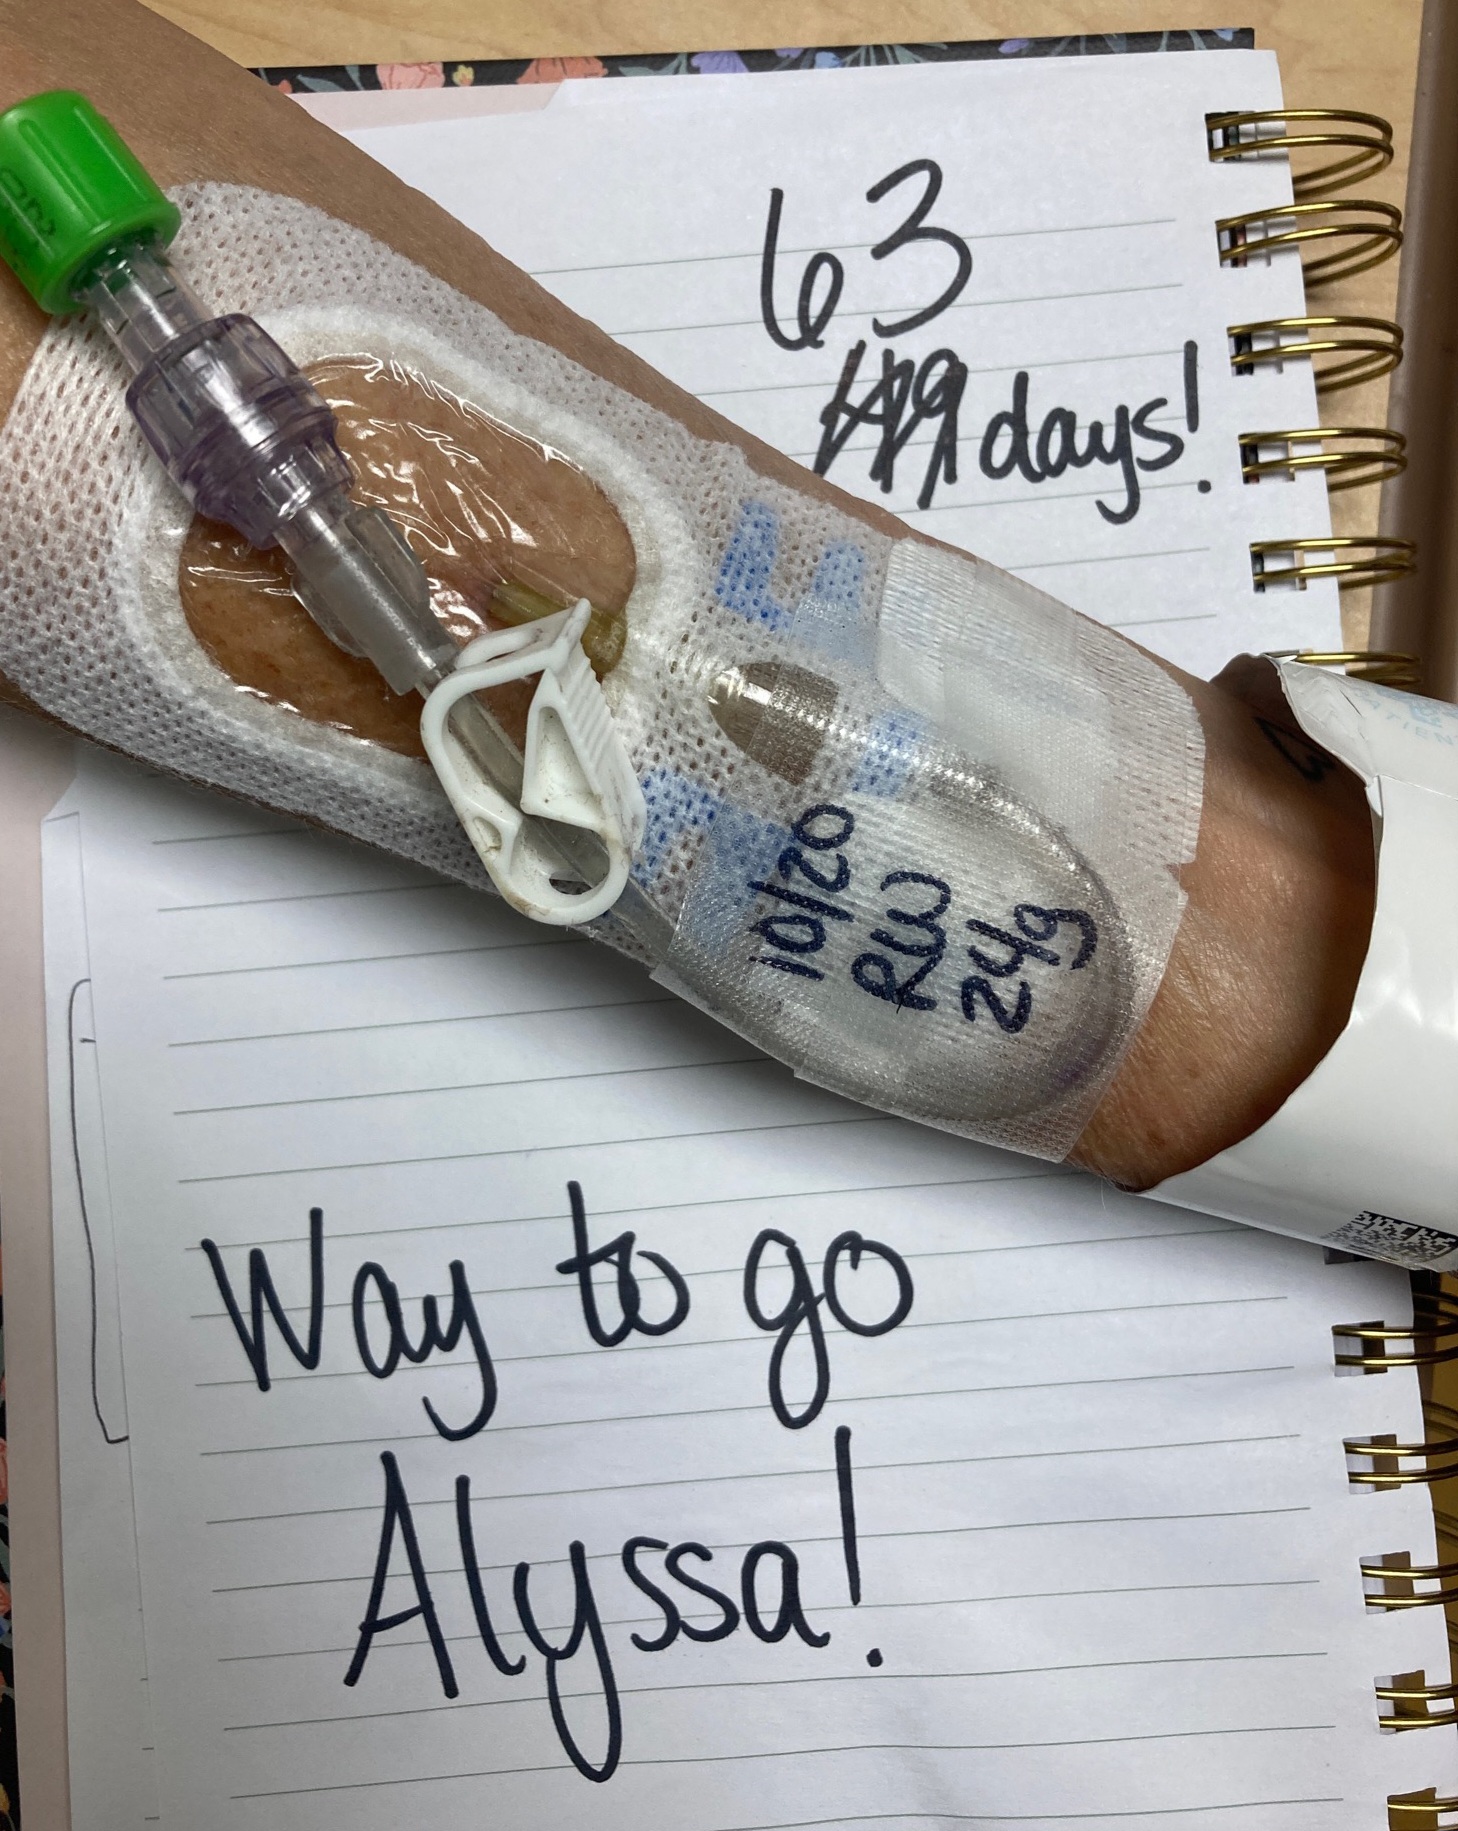 An arm with an IV and a notebook page that reads "63 Days! Way to go Alyssa!"